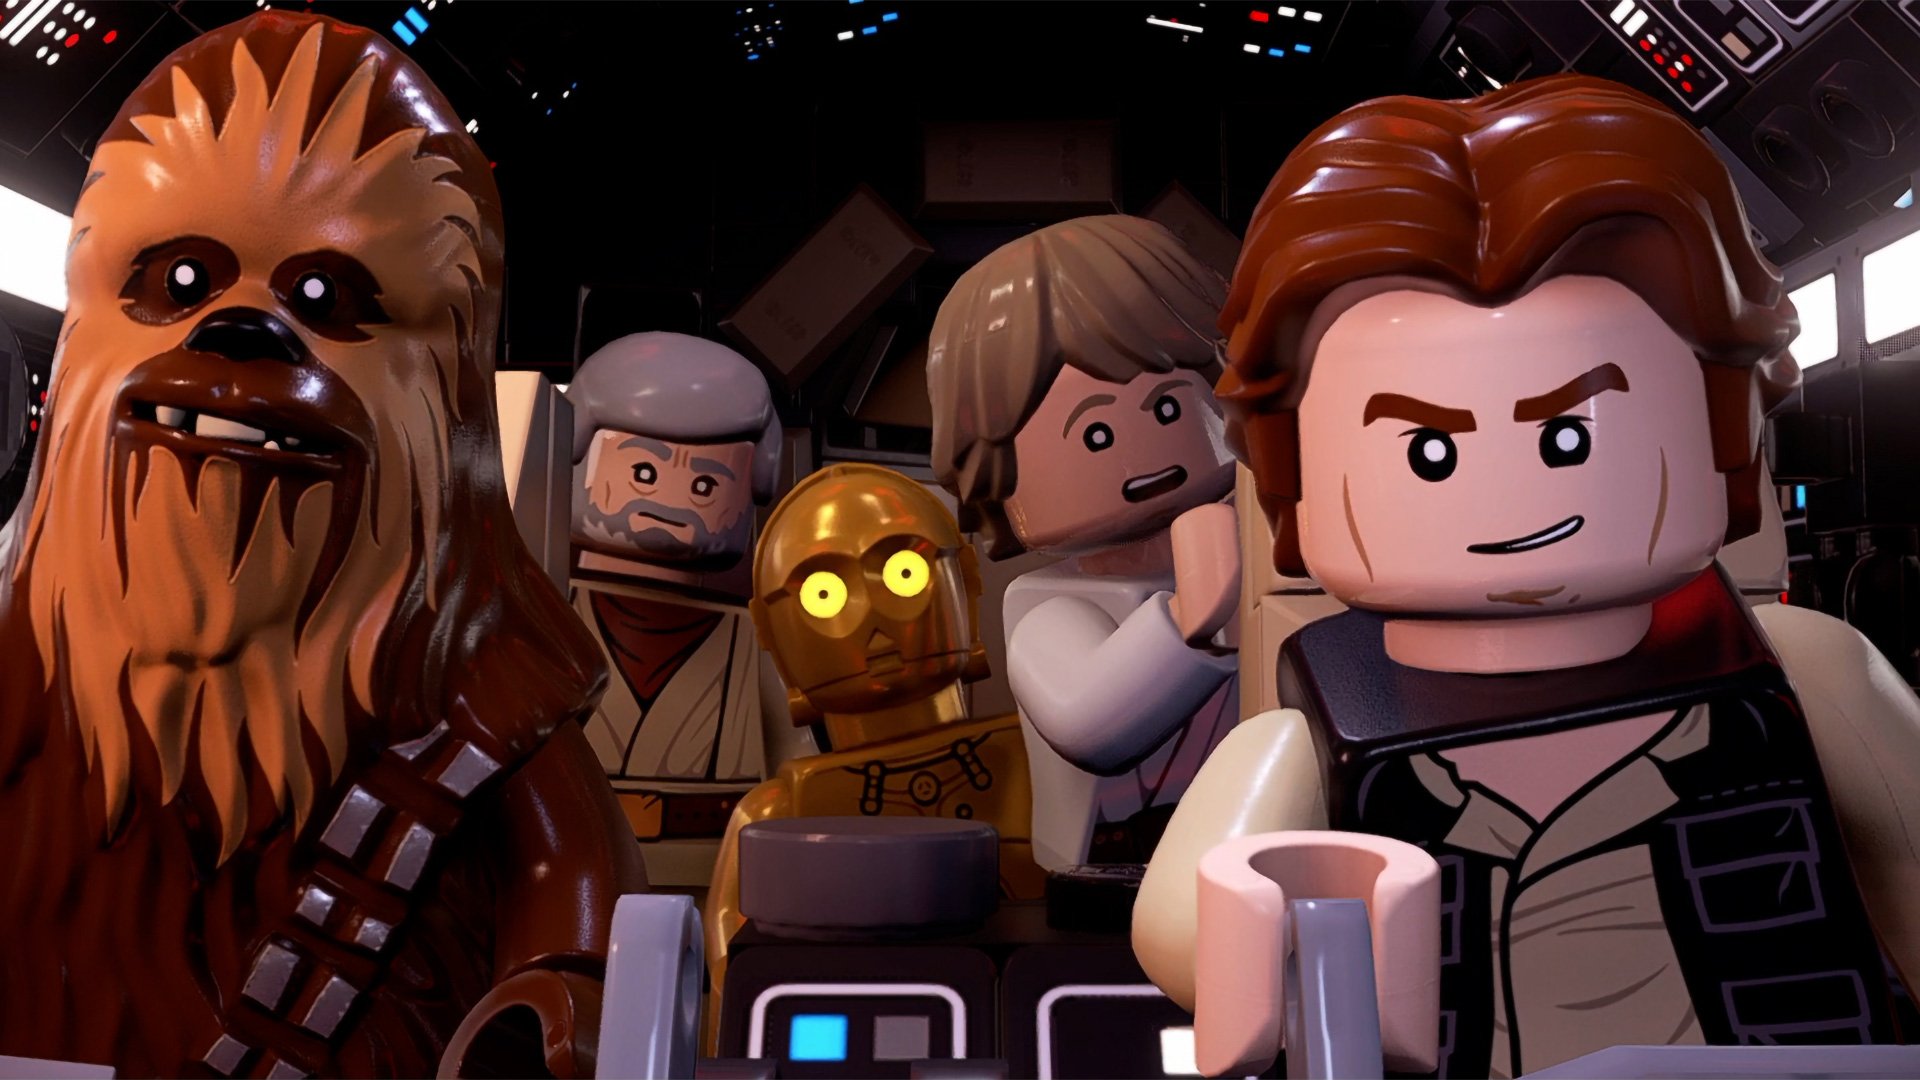 Lego Disney reportedly among several projects at Games | VGC